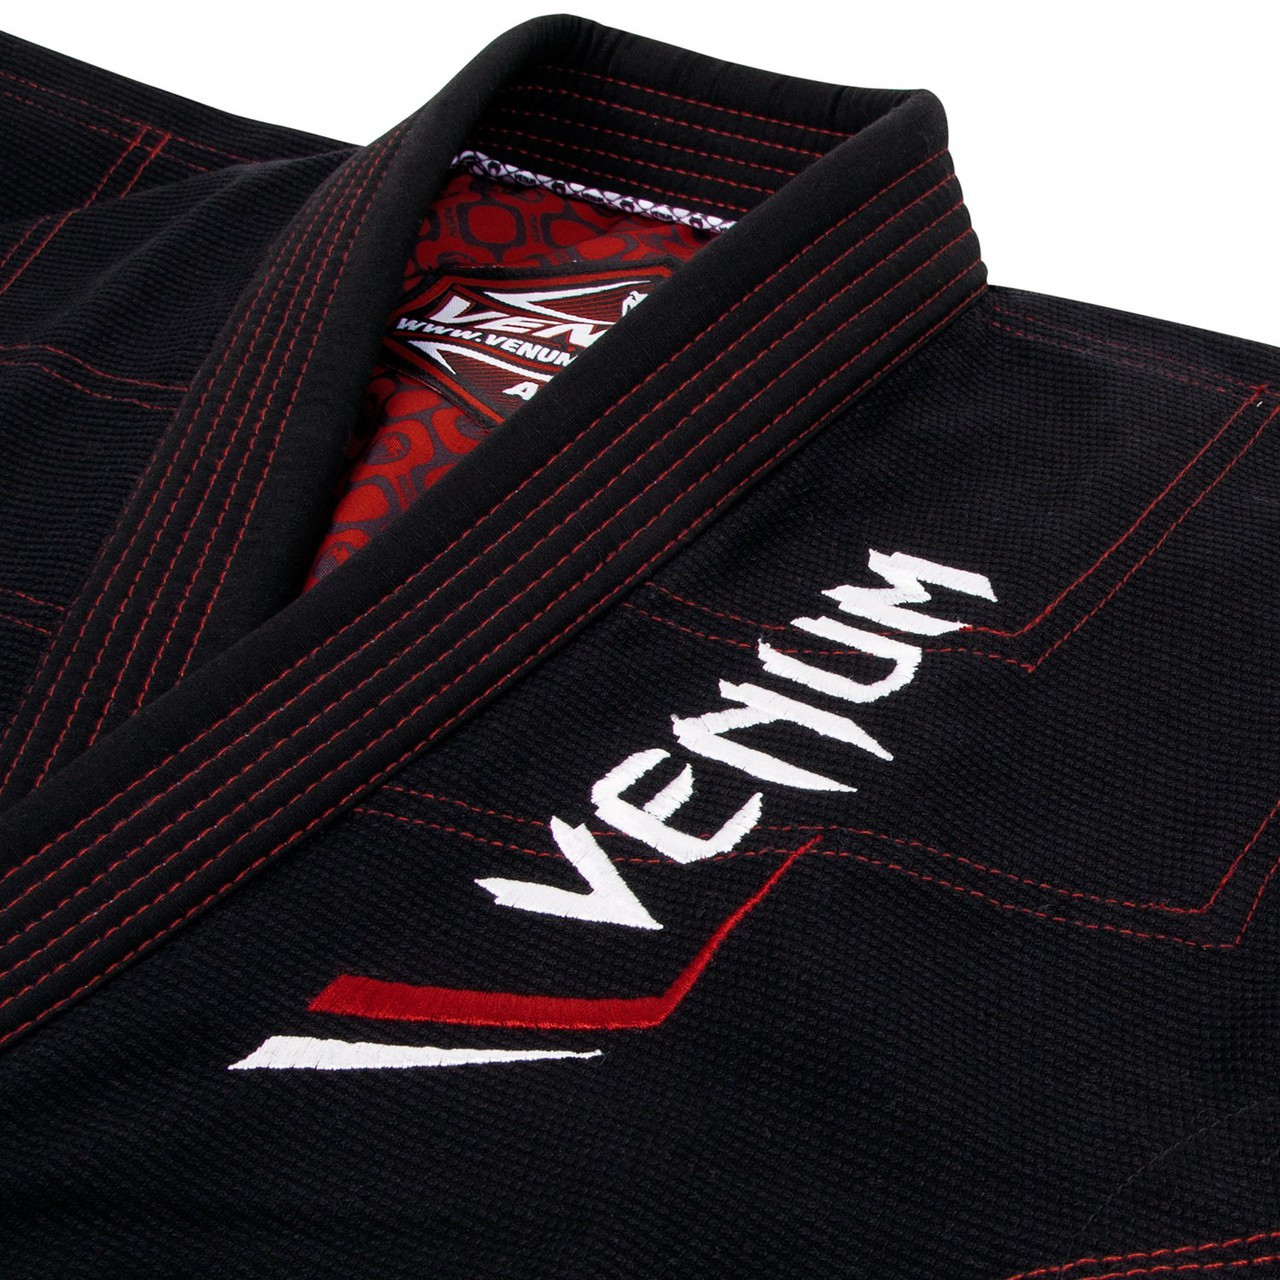 gi top zoomed in to logo Venum Elite Light BJJ GI in Black is now available at www.thejiujitsushop.com

Enjoy Free Shipping from The Jiu Jitsu Shop today! 